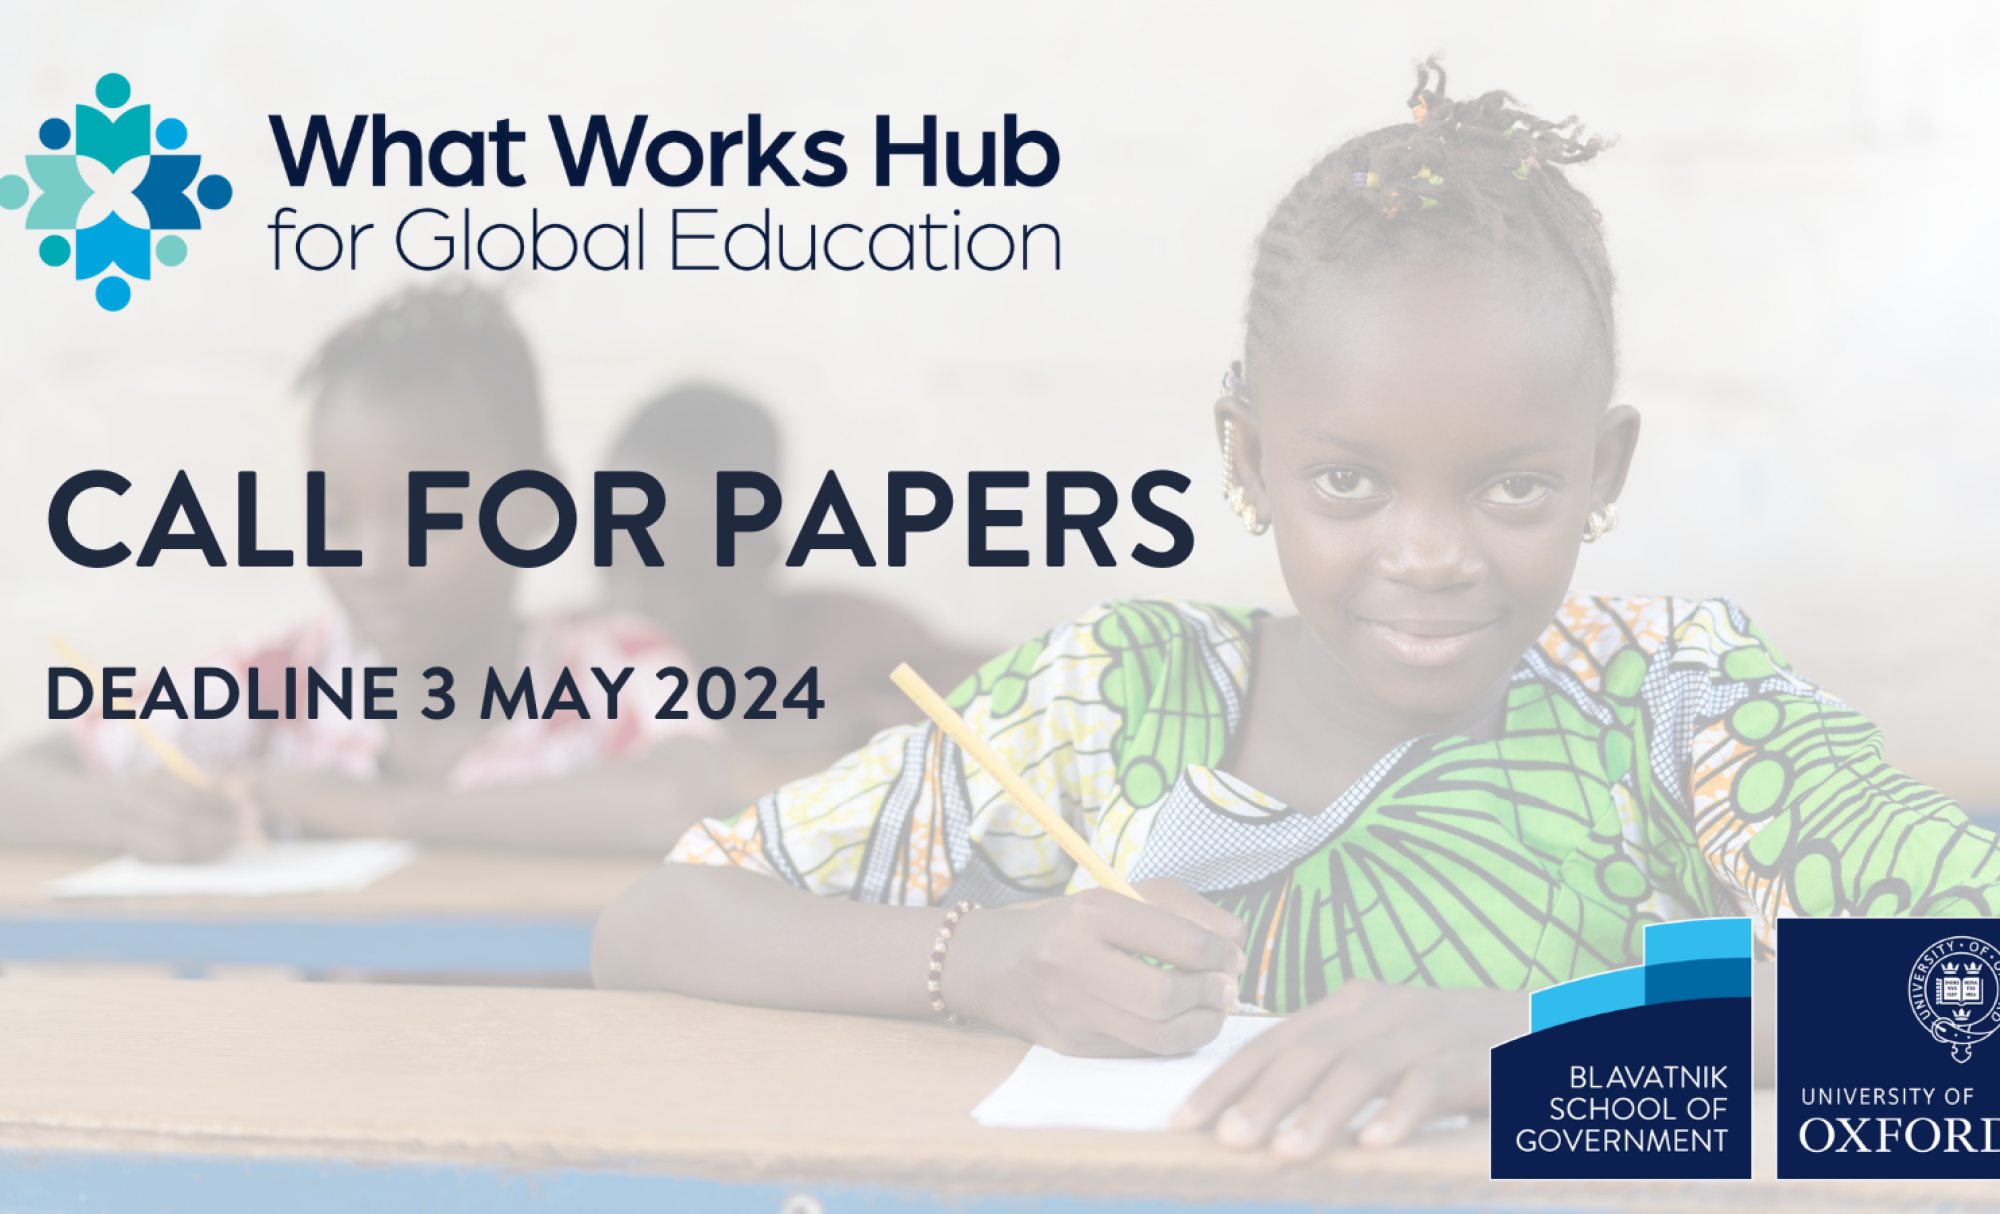 What Works Hub for Global Education call for papers (deadline 3 May 2024)